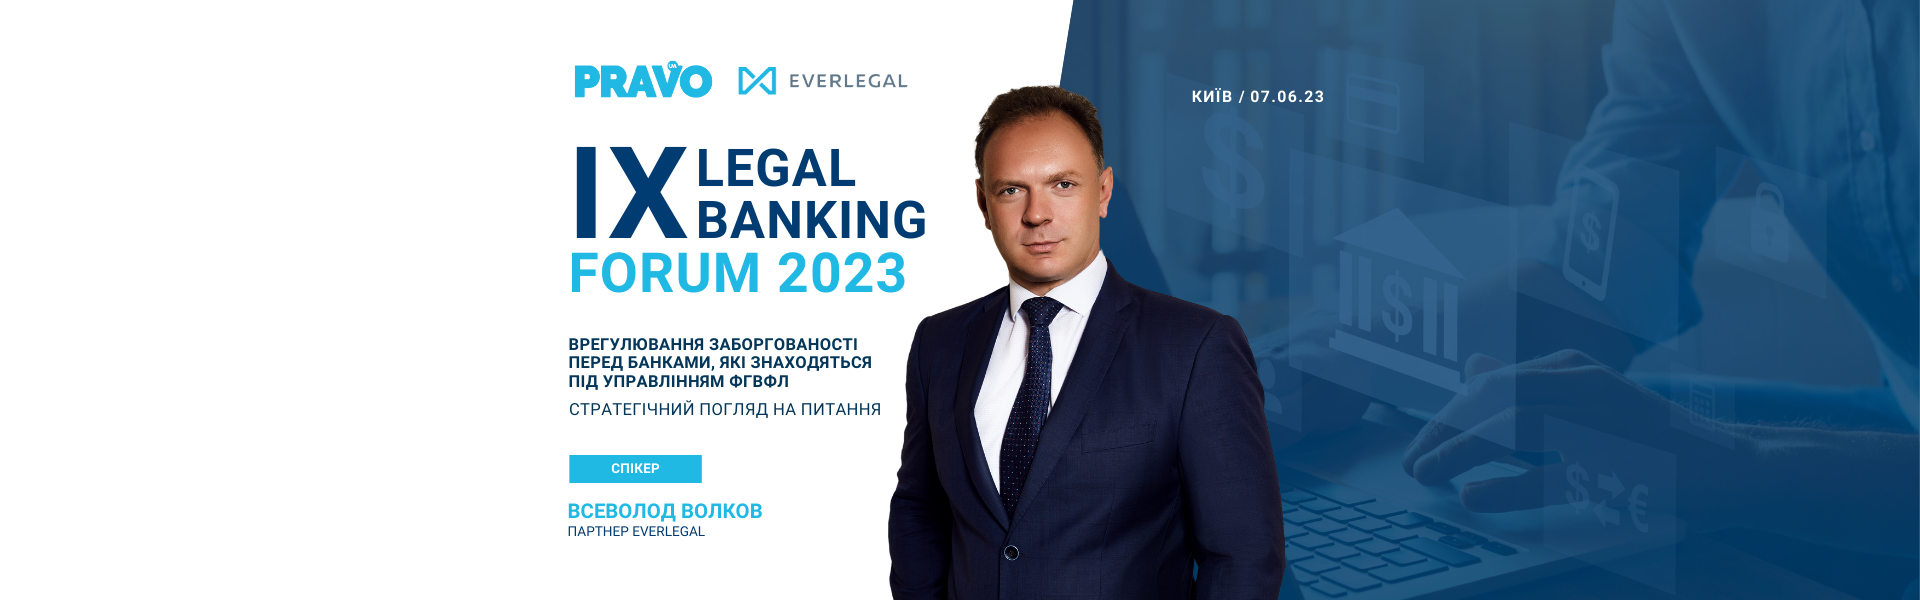 Welcome to the XI LEGAL BANKING FORUM 2023